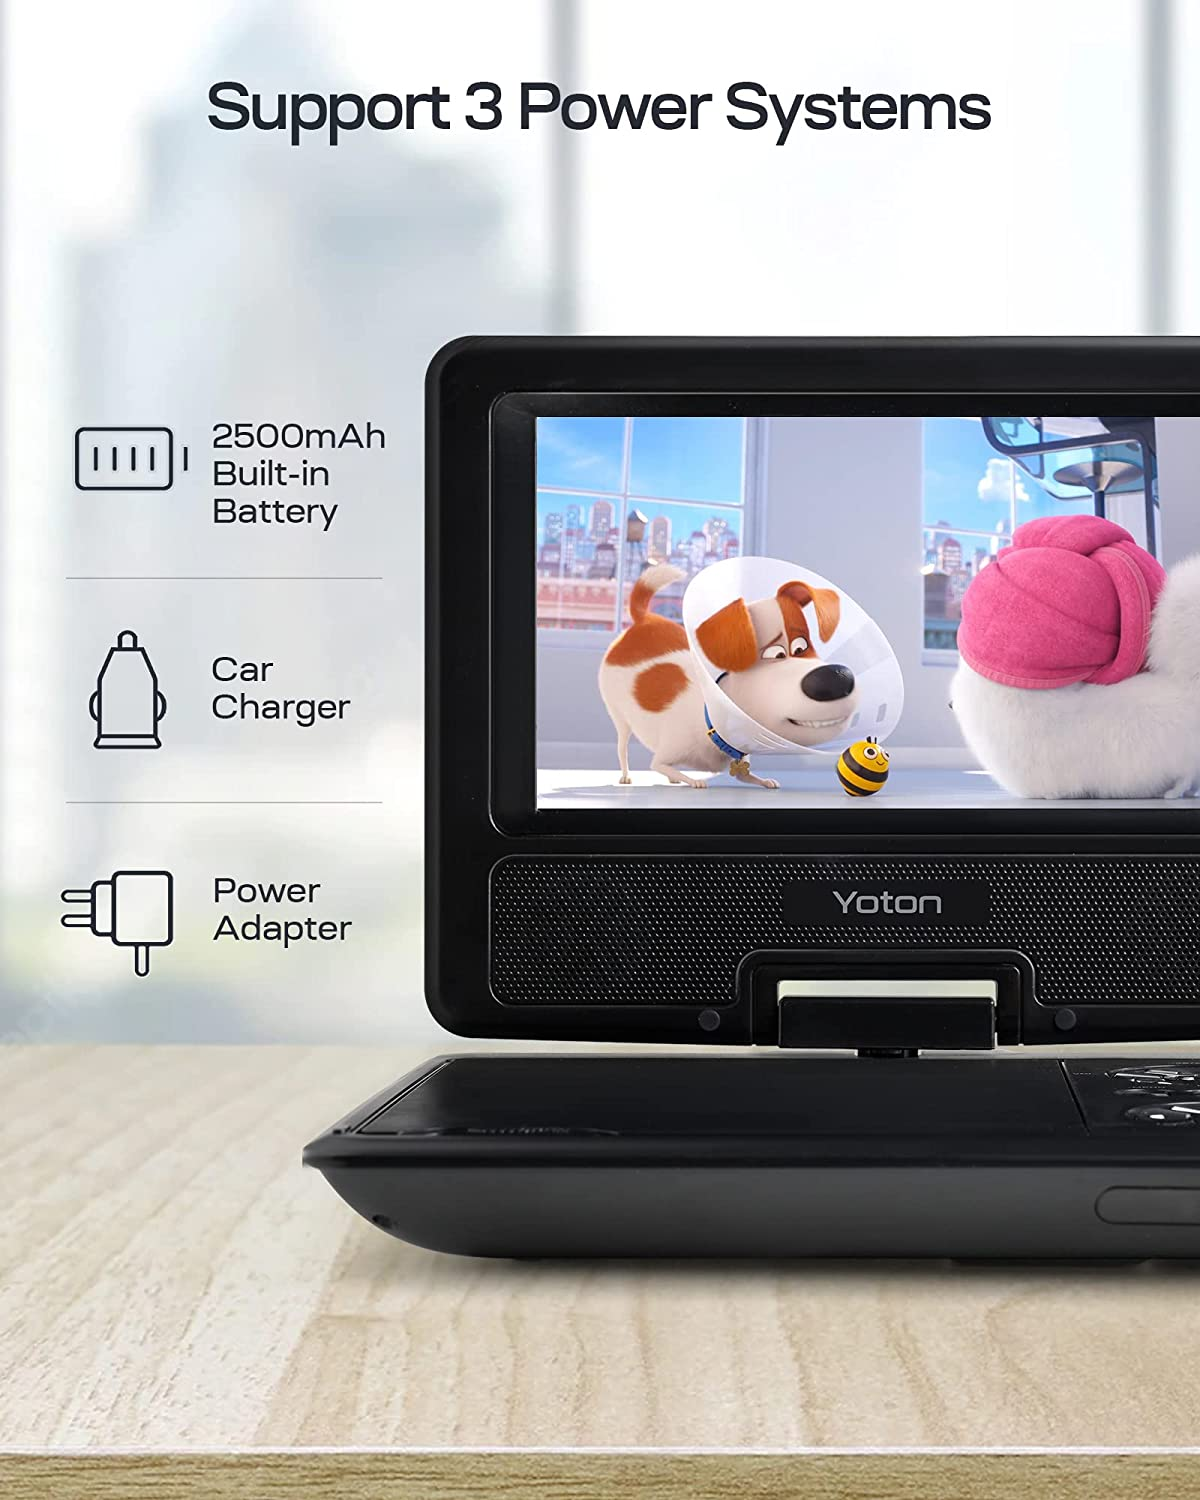 9.5" Portable DVD Player with 7.5" Swivel Screen, 4-6 Hours Built-In Battery, Support SD Card/Usb/Multiple Disc Formats, Support Sync Screen to TV, Projector